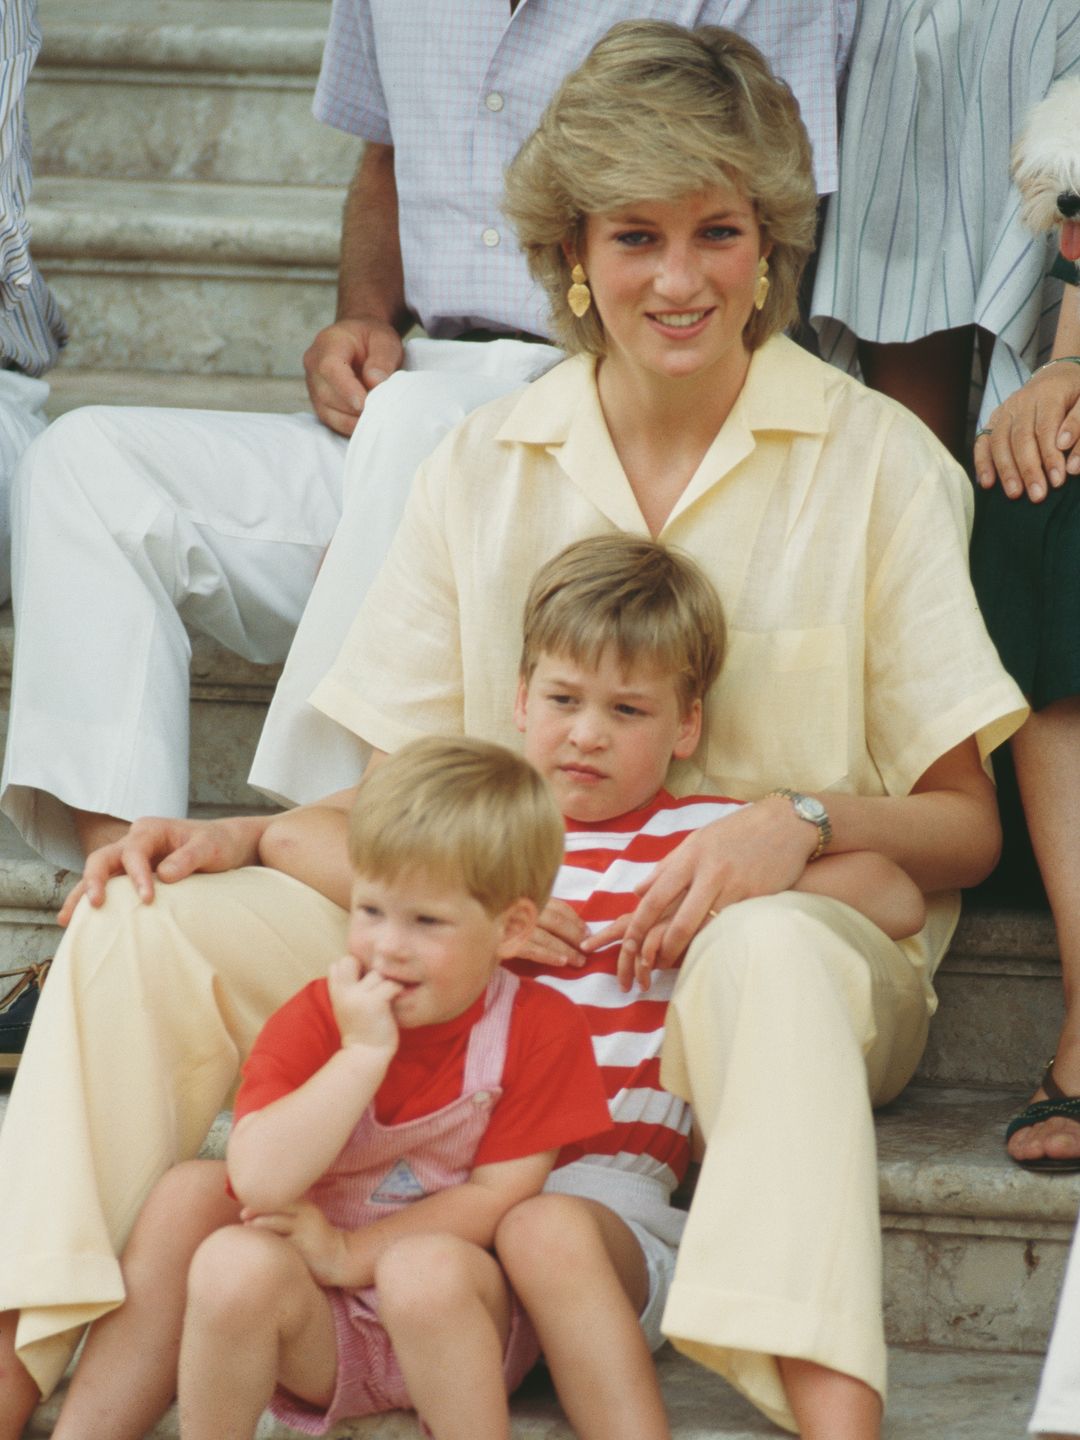 Diana, Princess of Wales with her sons William and Harry during a holiday with the Spanish royal family at the Marivent Palace in Palma de Mallorca, Spain, August 1987